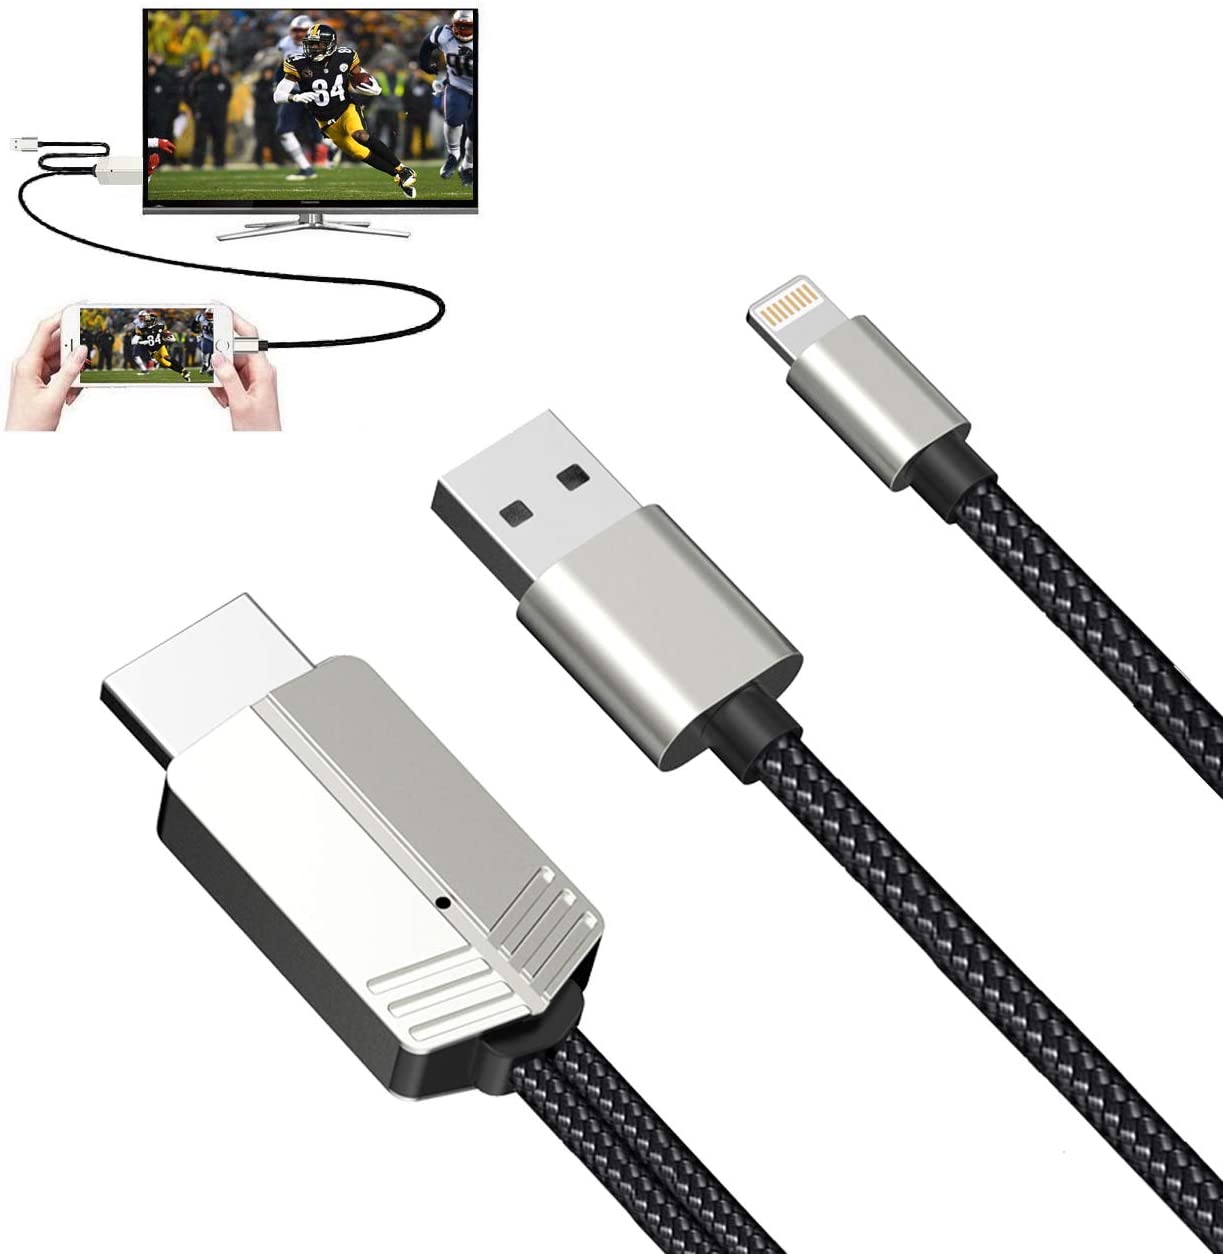 Wireless WiFi HDMI Cable HDTV AV Adapter for iPad iphone ...